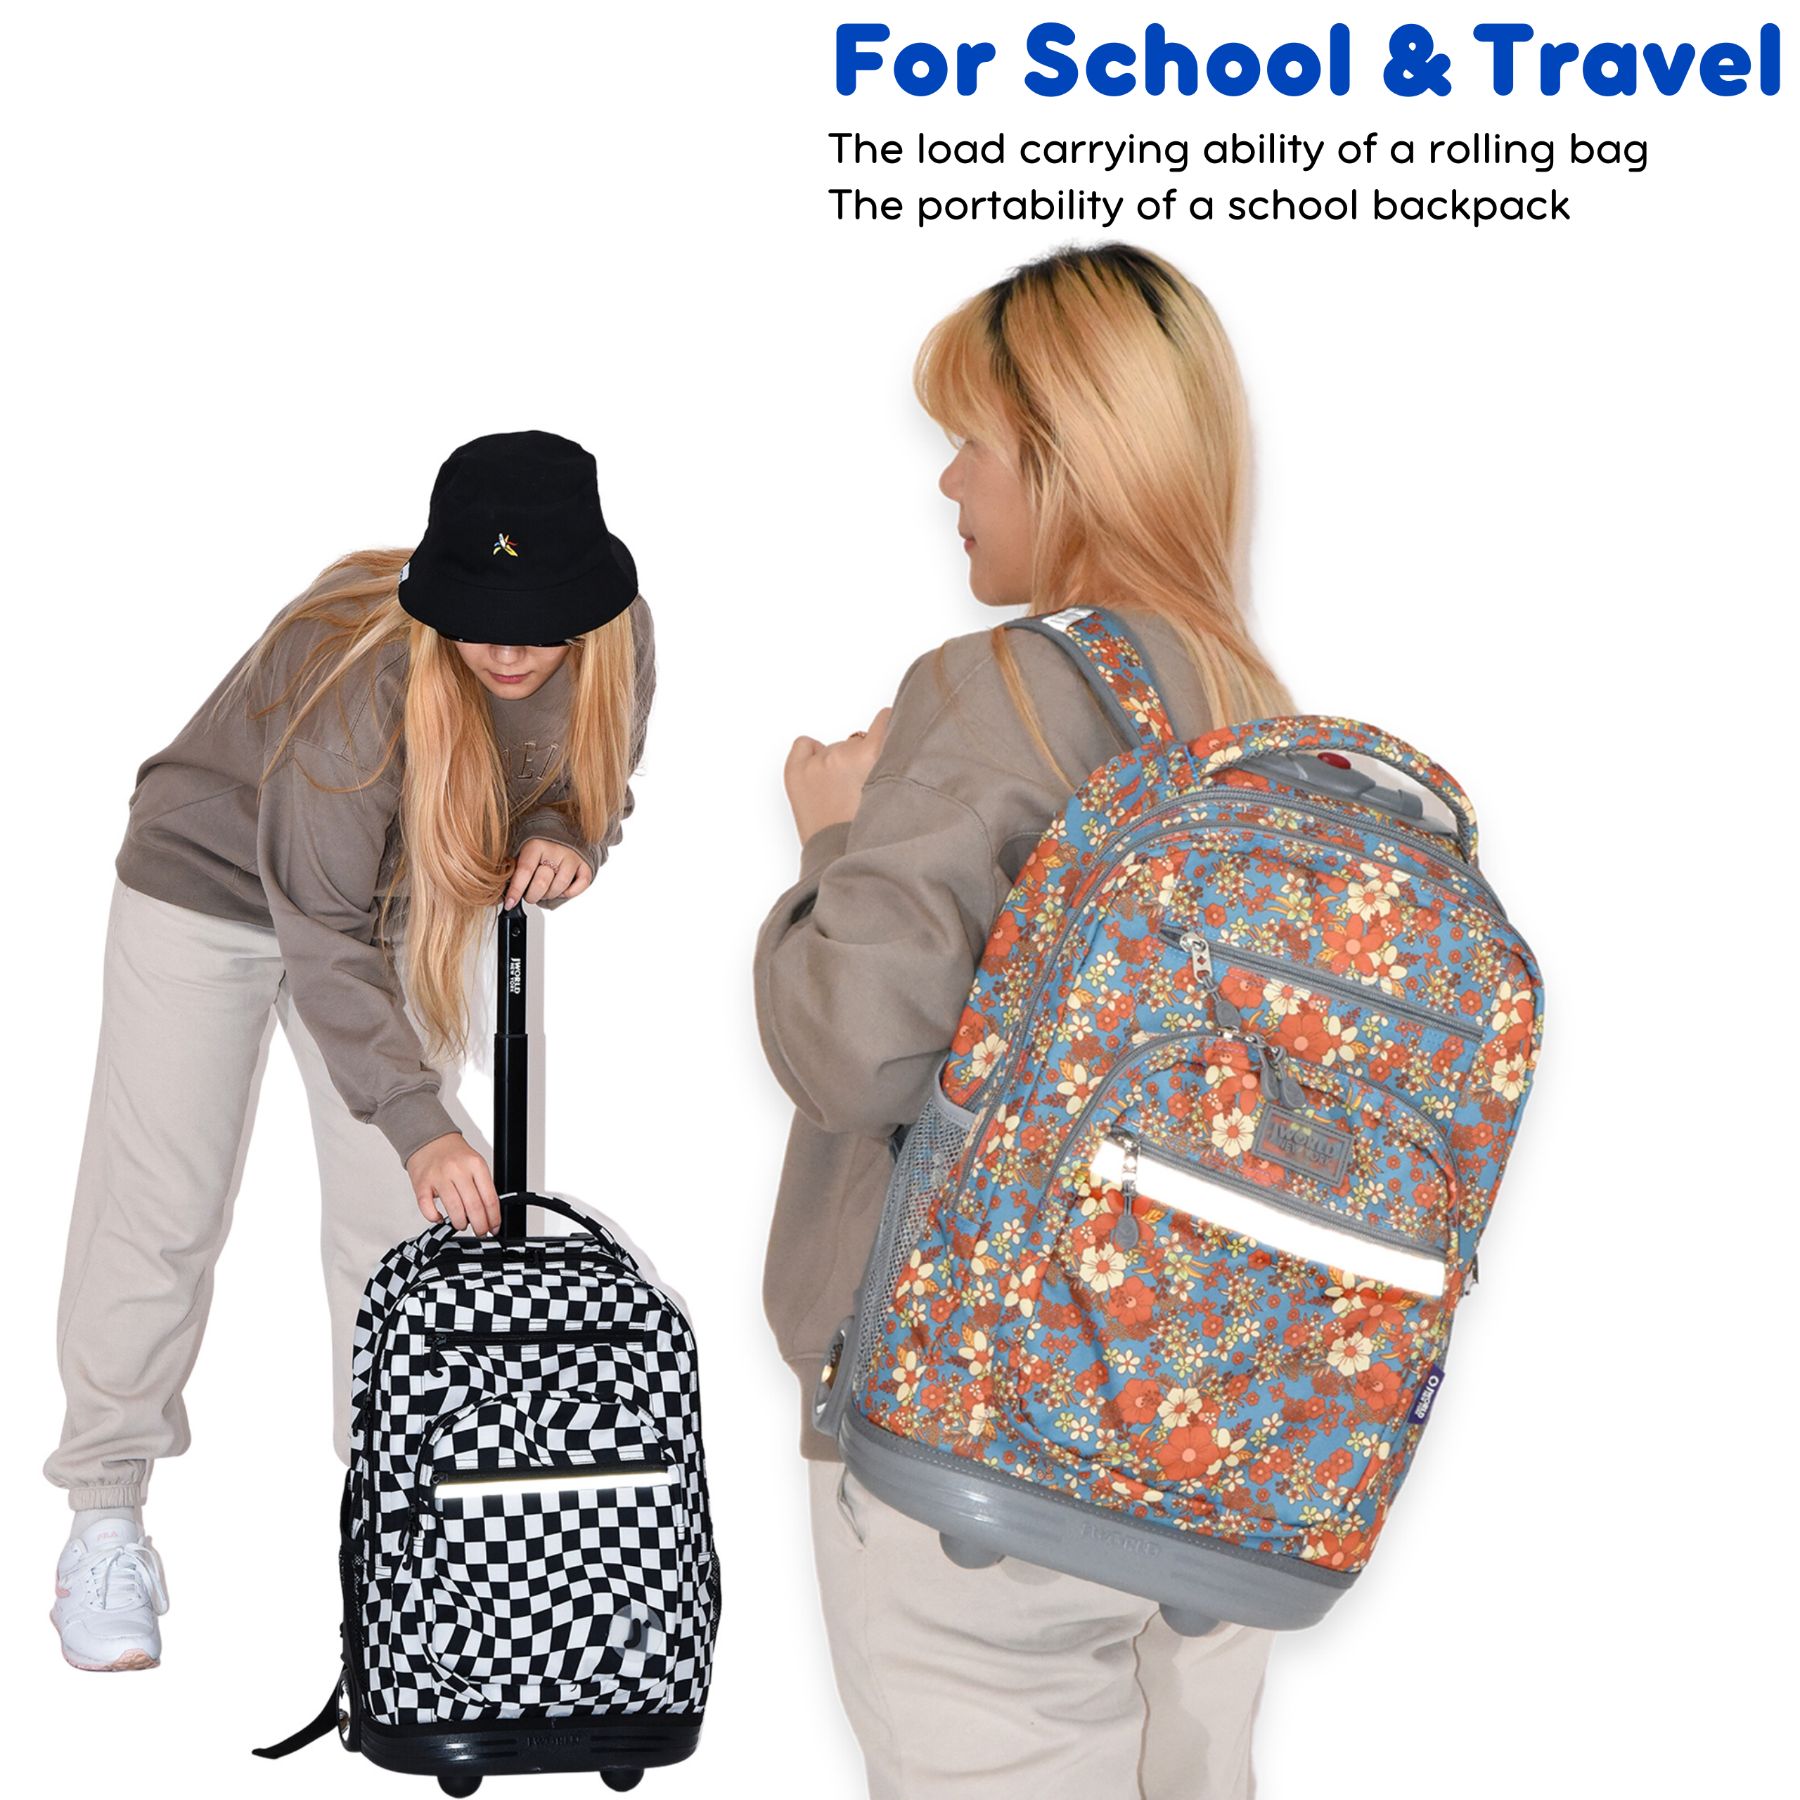 J World Unisex Sundance 20" Rolling Backpack with Laptop Sleeve for School and Travel, Camo - image 3 of 7